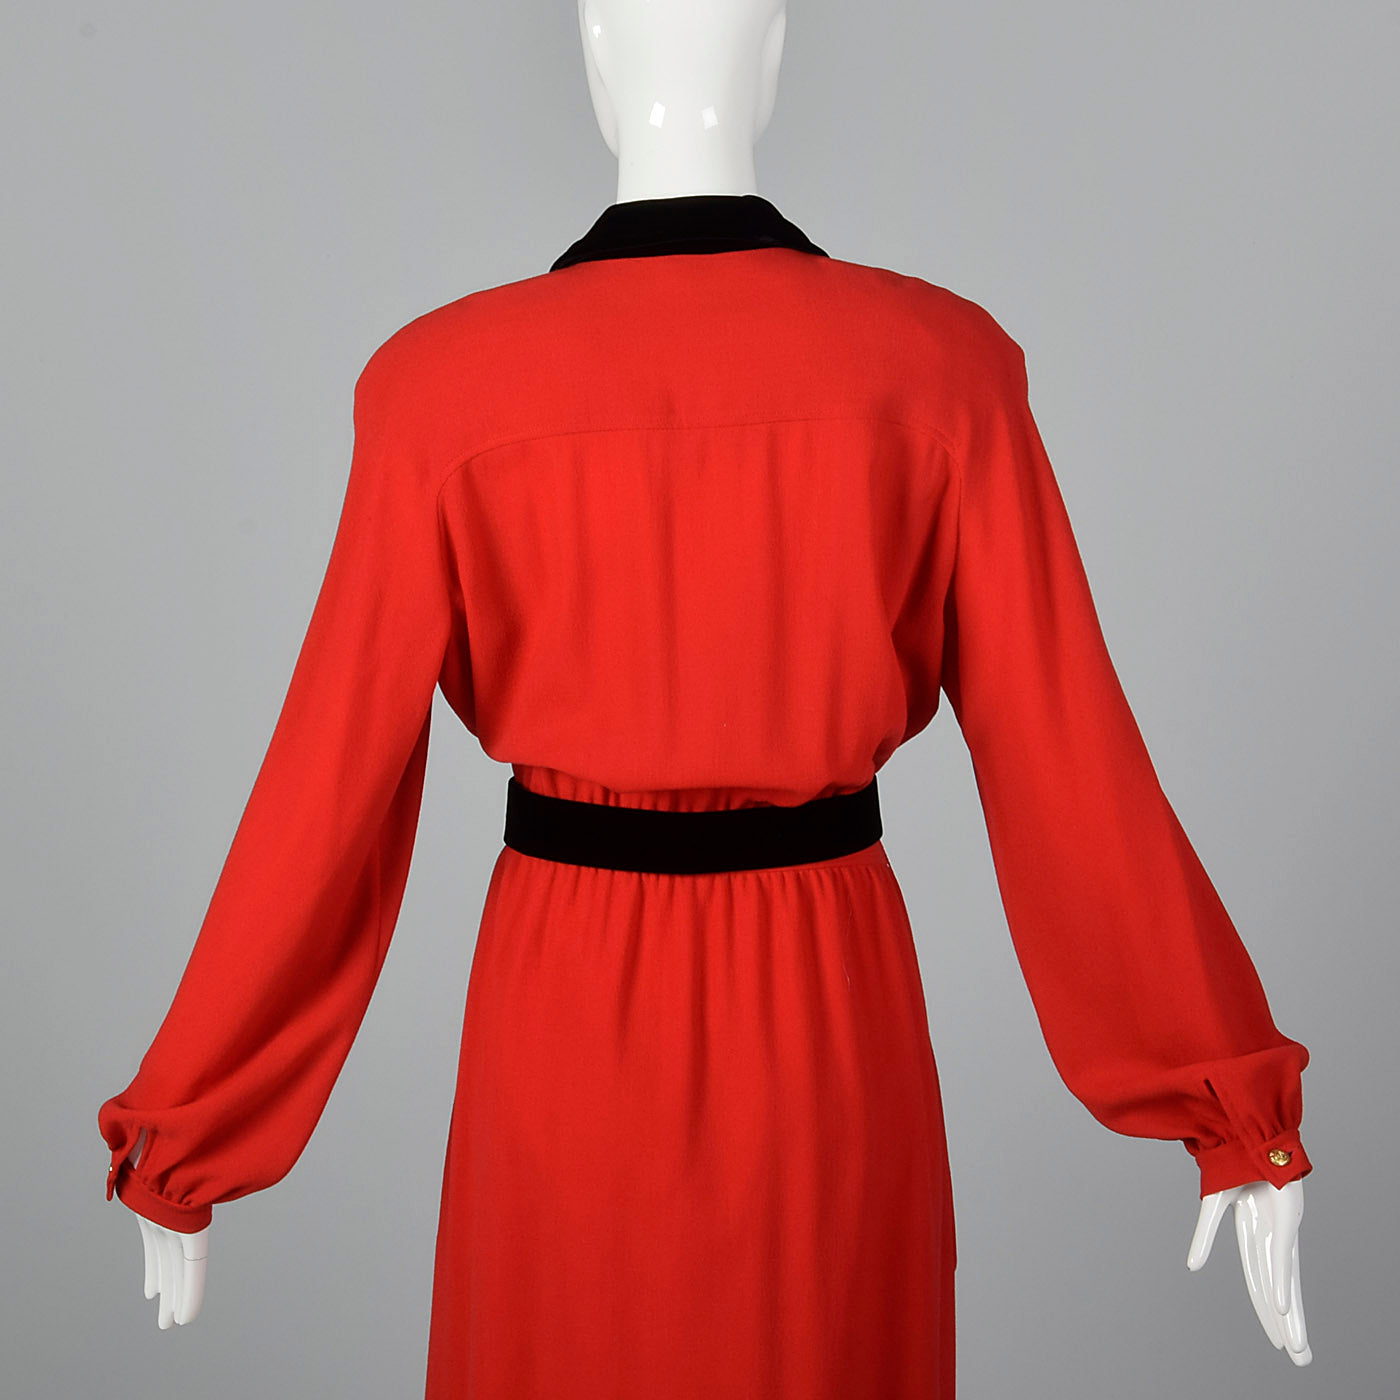 1980s Valentino Boutique Red Dress with Black Trim – Style & Salvage